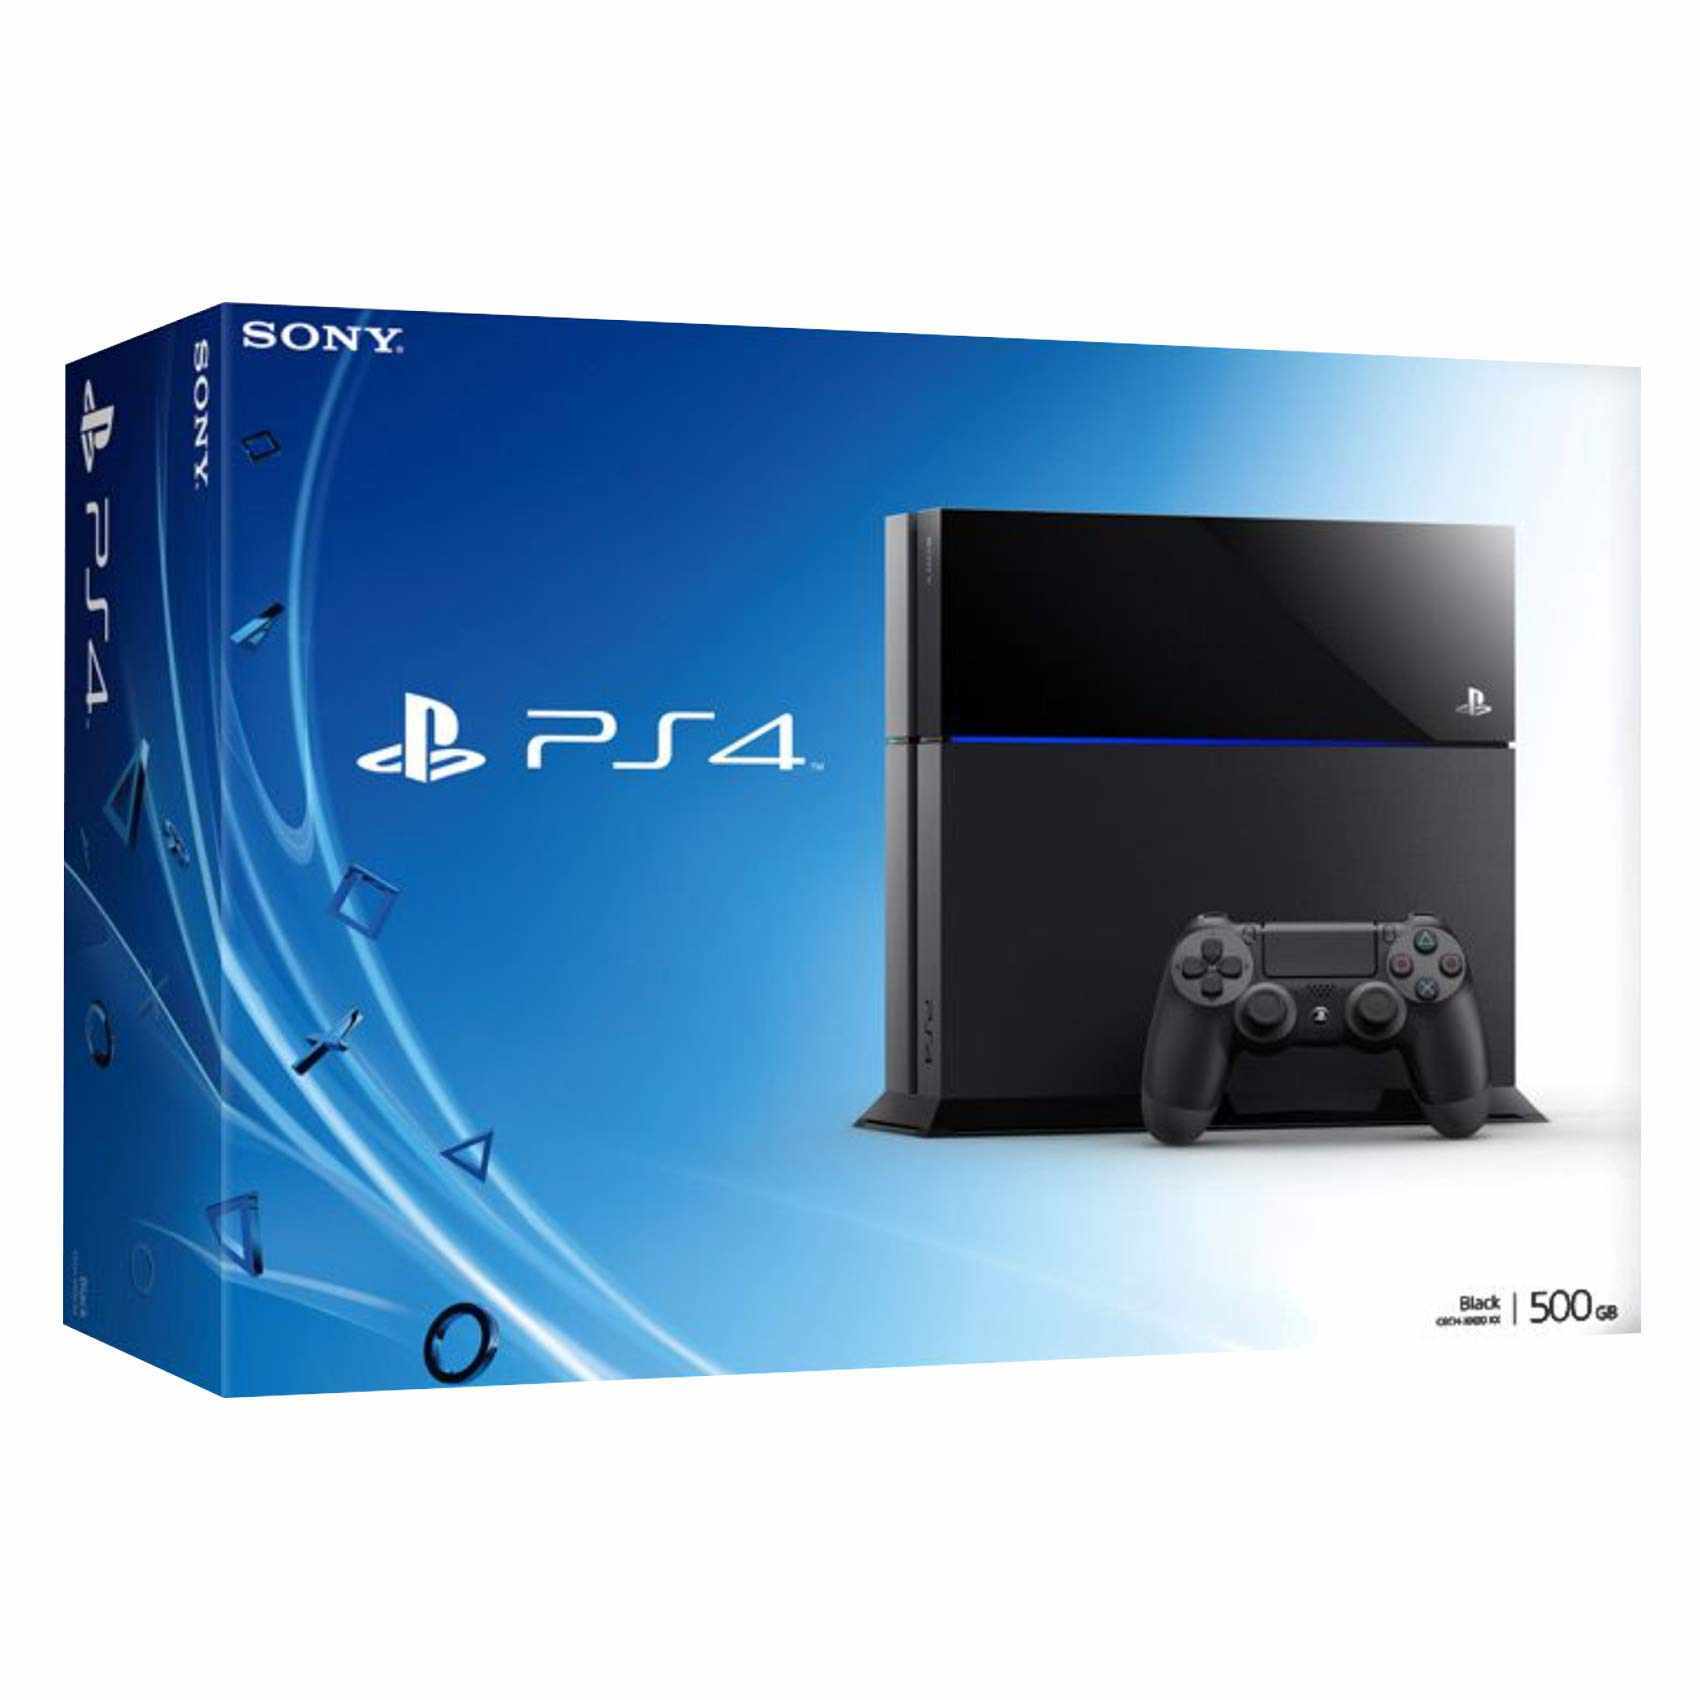 Buy Sony PS4 500GB Console Black Online